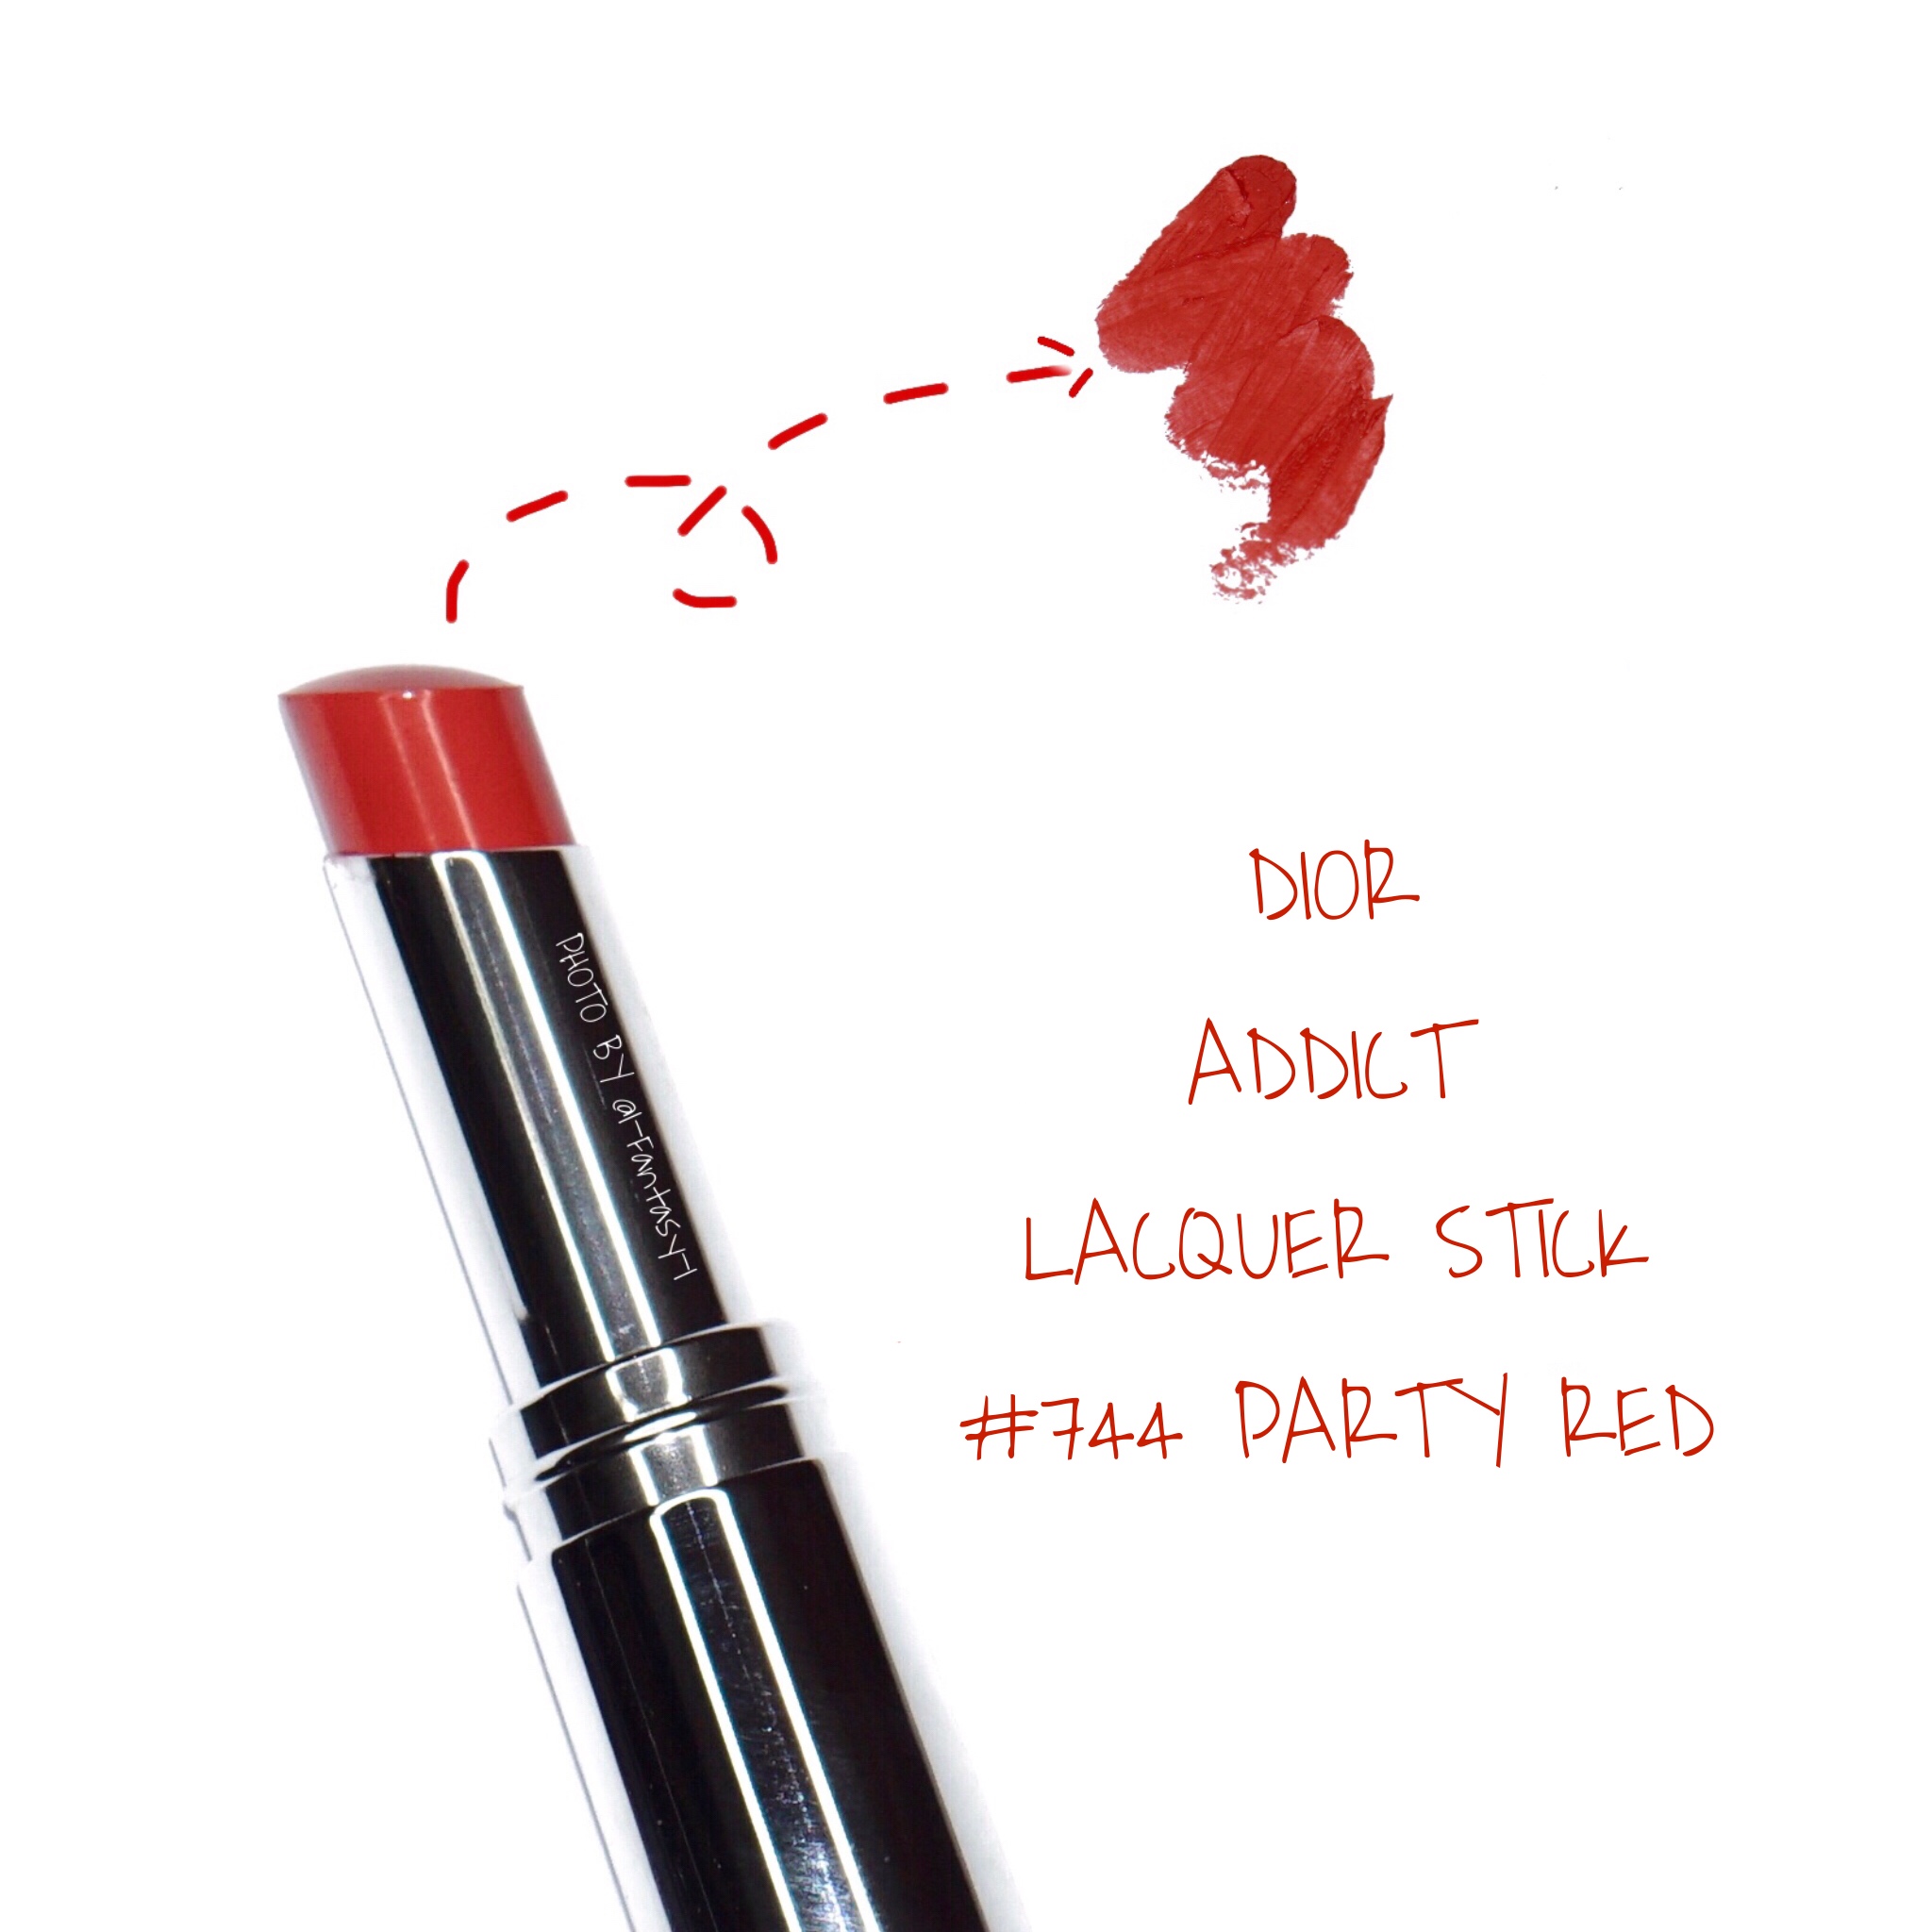 DIOR /ADDICT LACQUER STICK #744 PARTY RED 试色